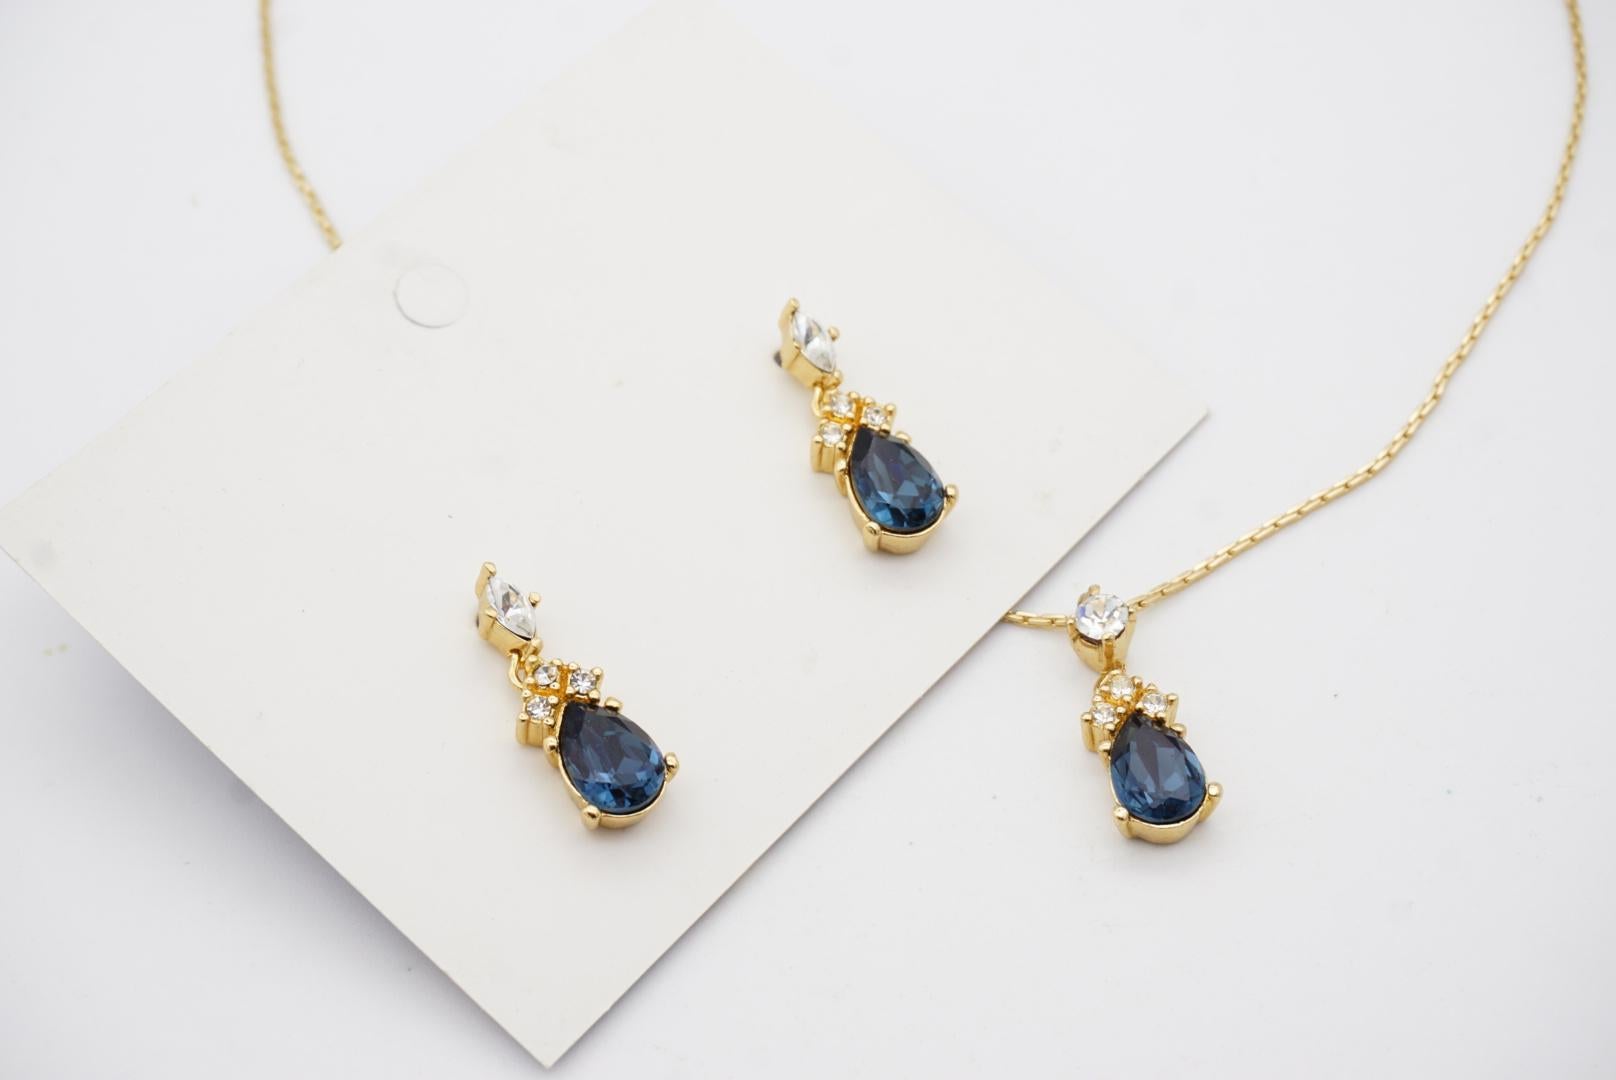 Christian Dior Vintage 1980s Sapphire Crystal Water Drop Set Necklace Earrings For Sale 5